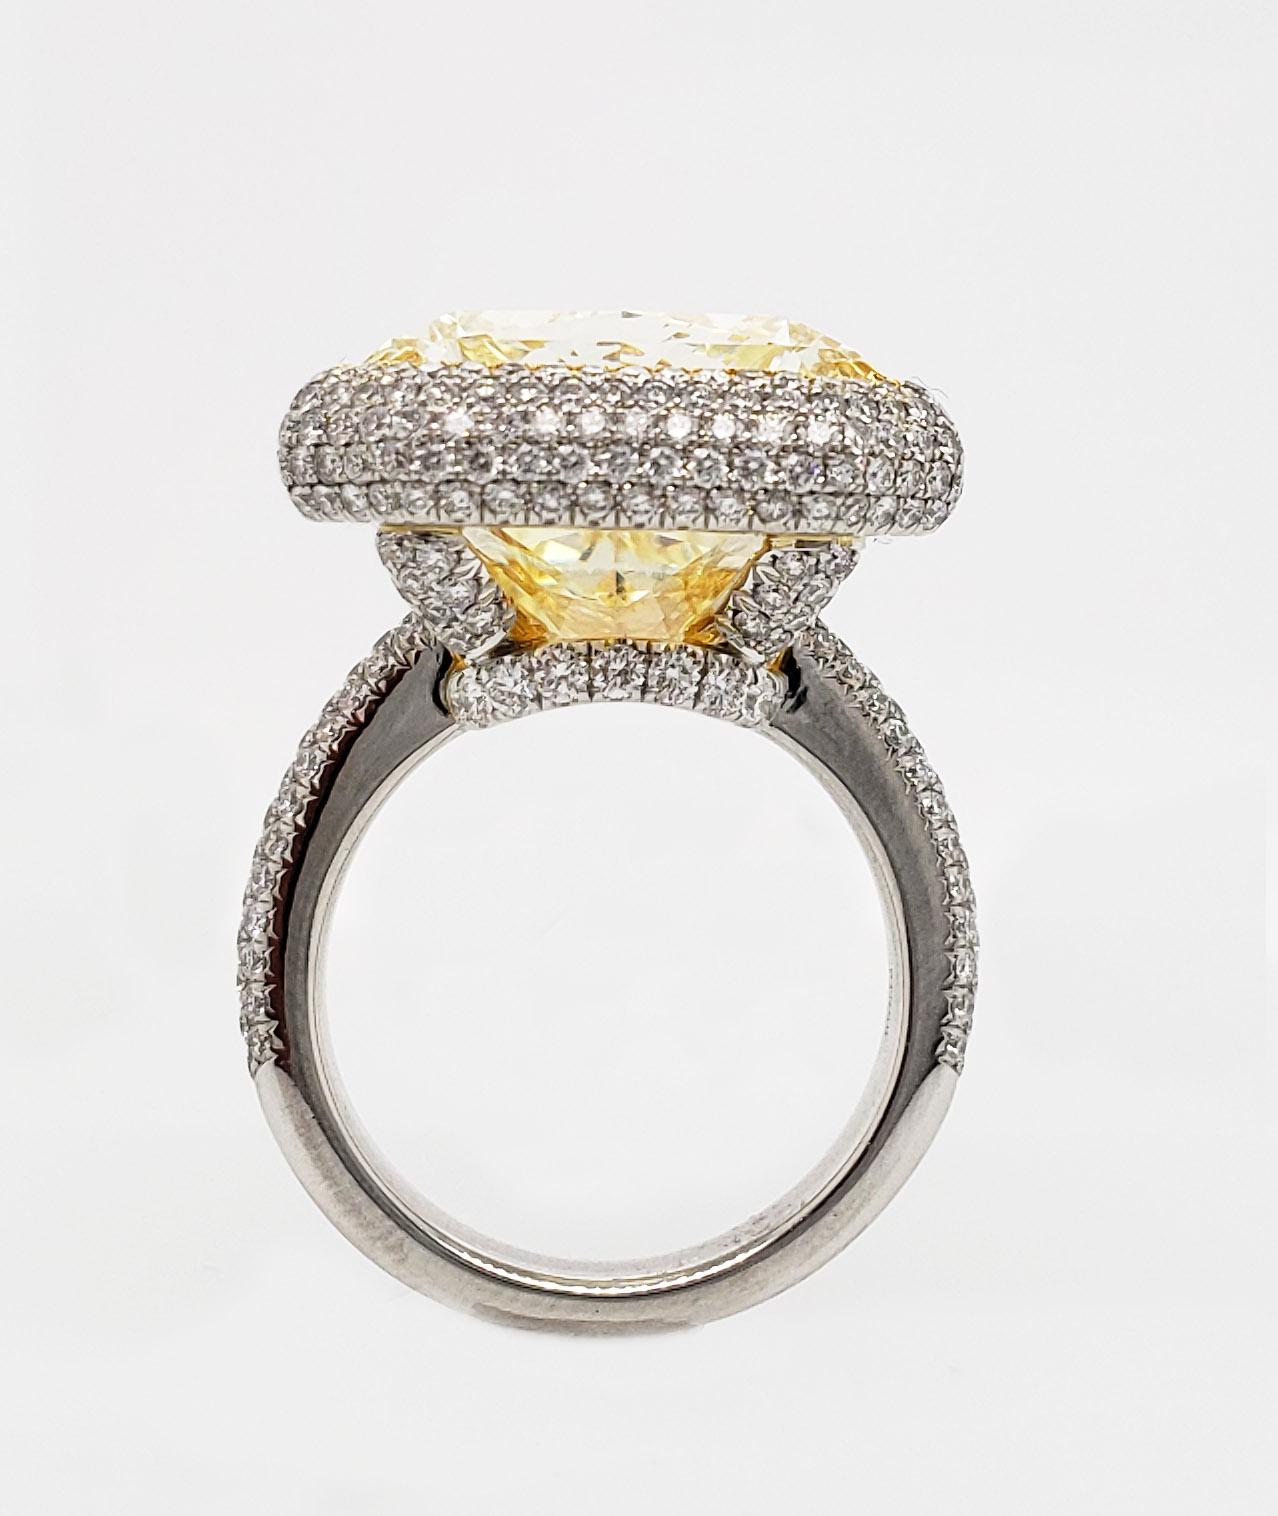 Contemporary Scarselli 31 Carat Natural Fancy Yellow Diamond Ring VS1 Clarity in Platinum GIA For Sale